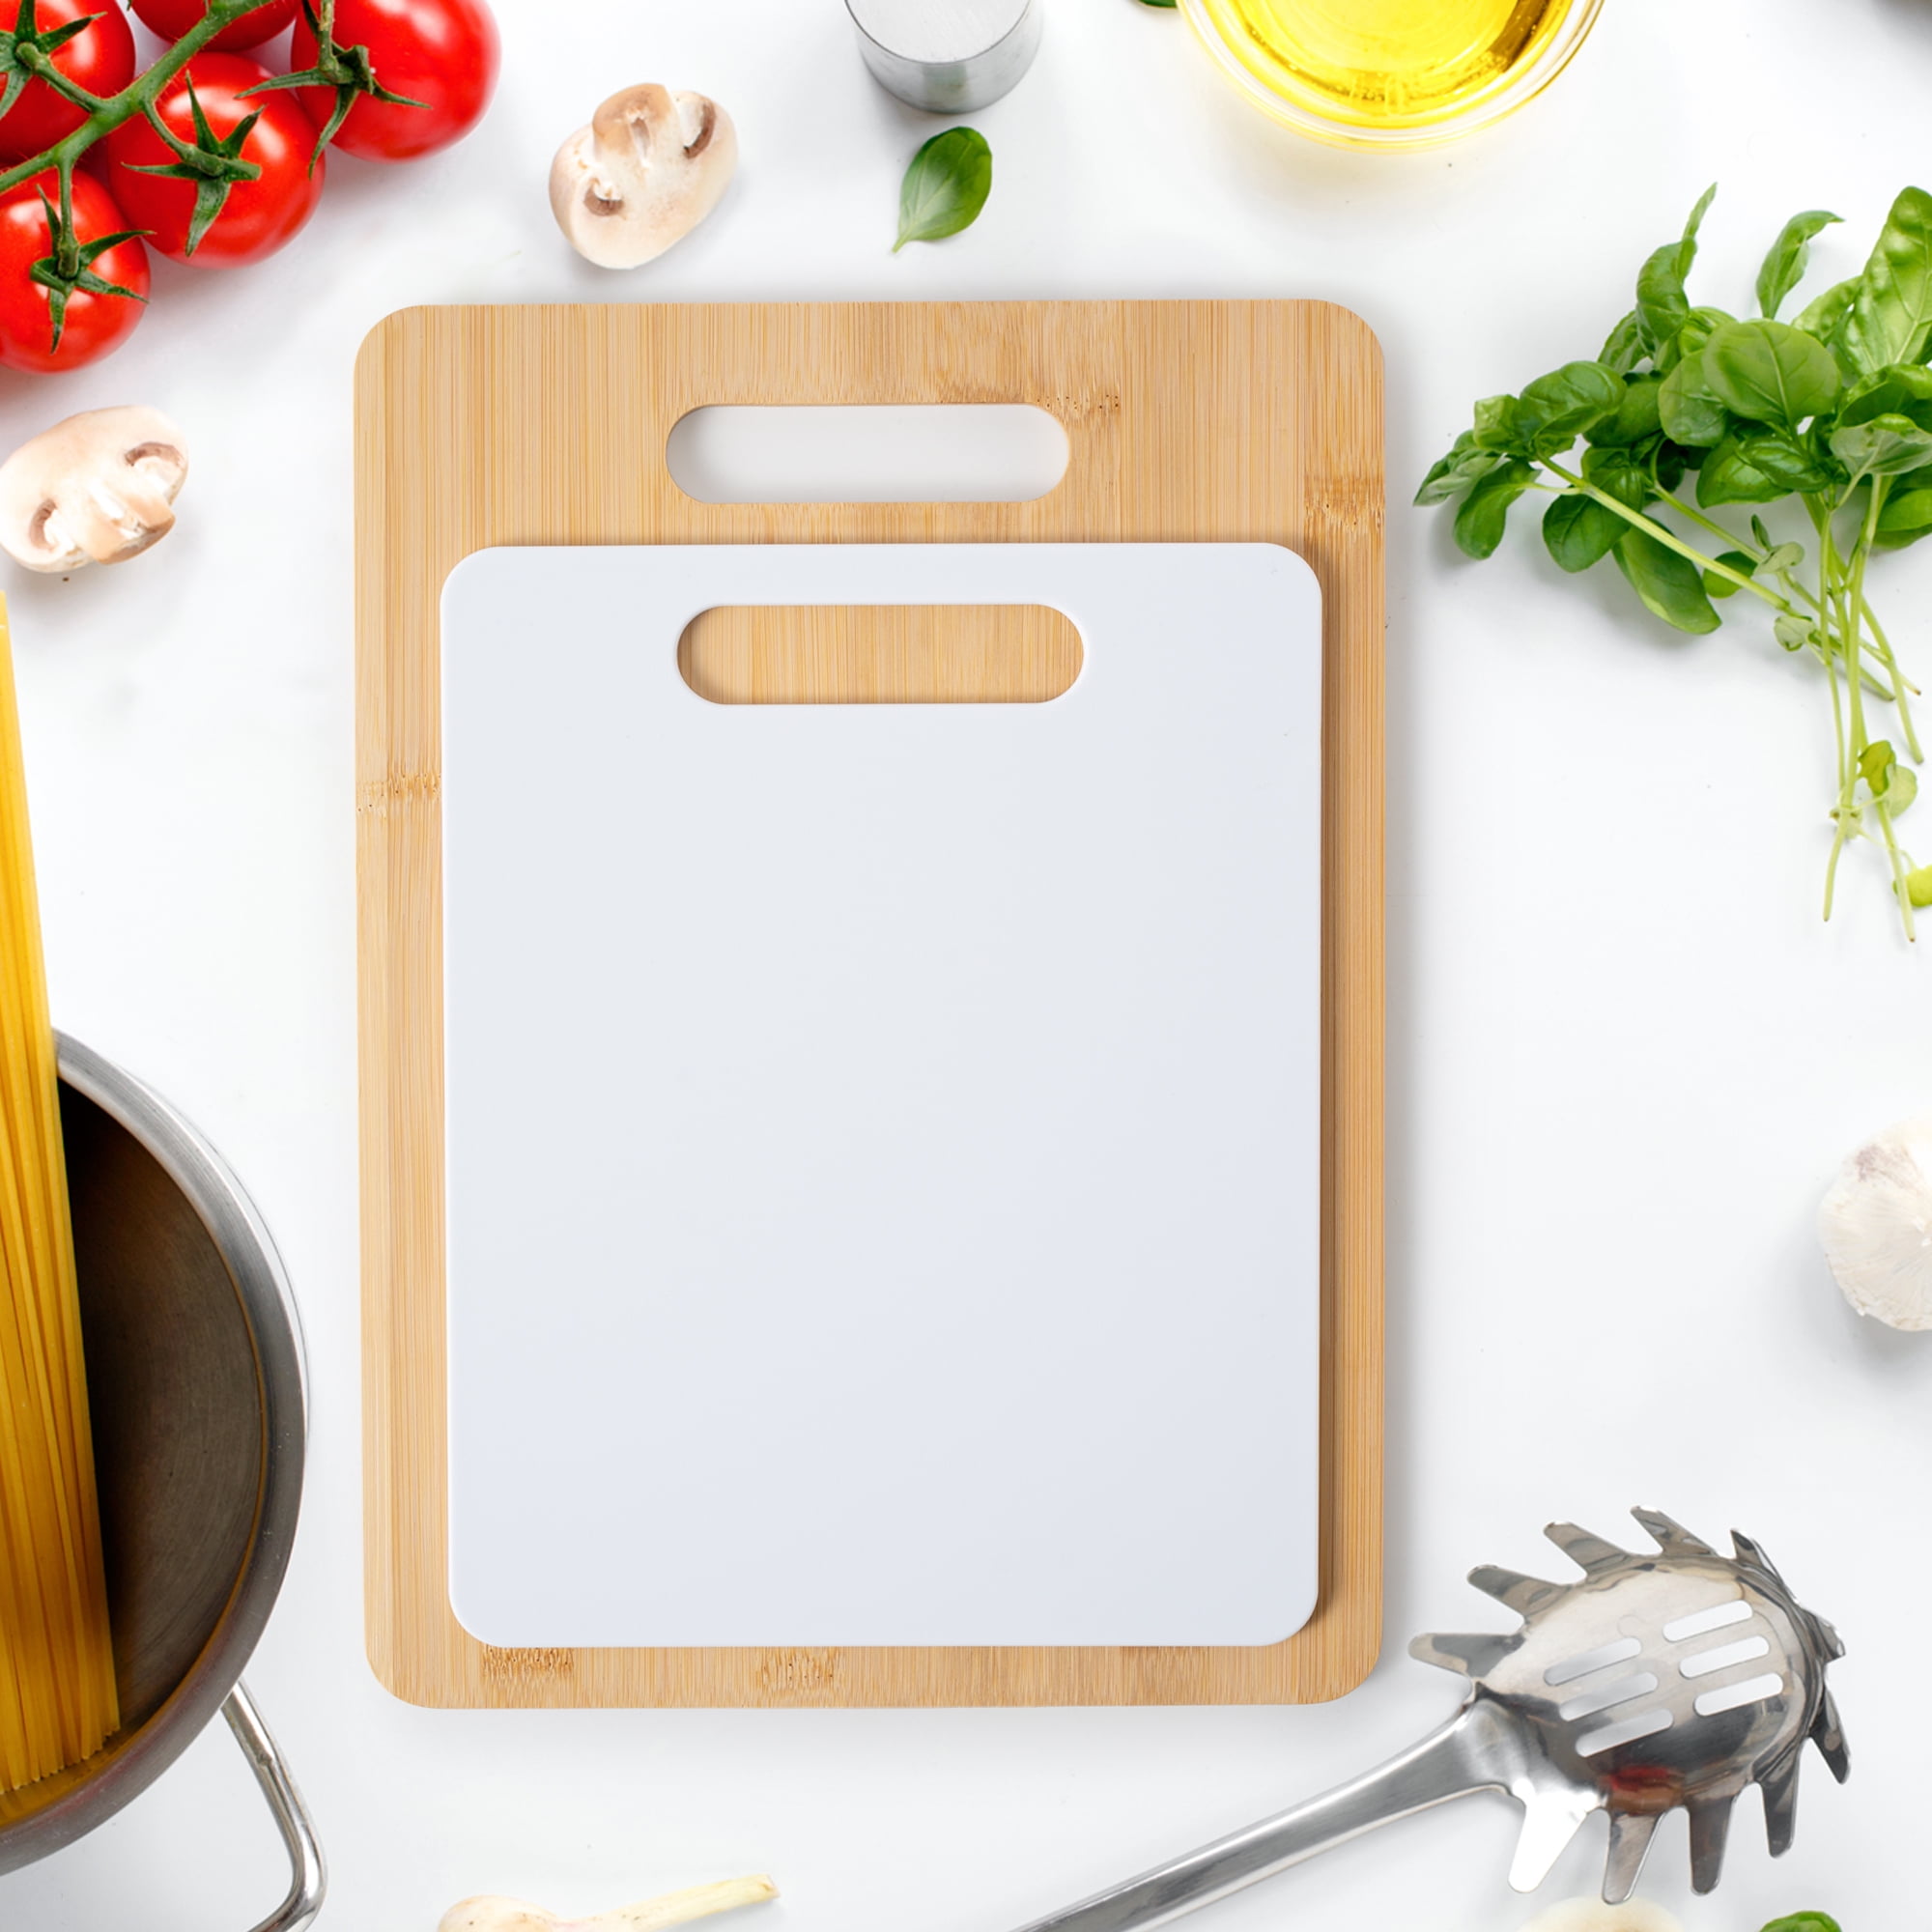 How To Care For Cutting Boards — Wood, Bamboo, Plastic, Marble